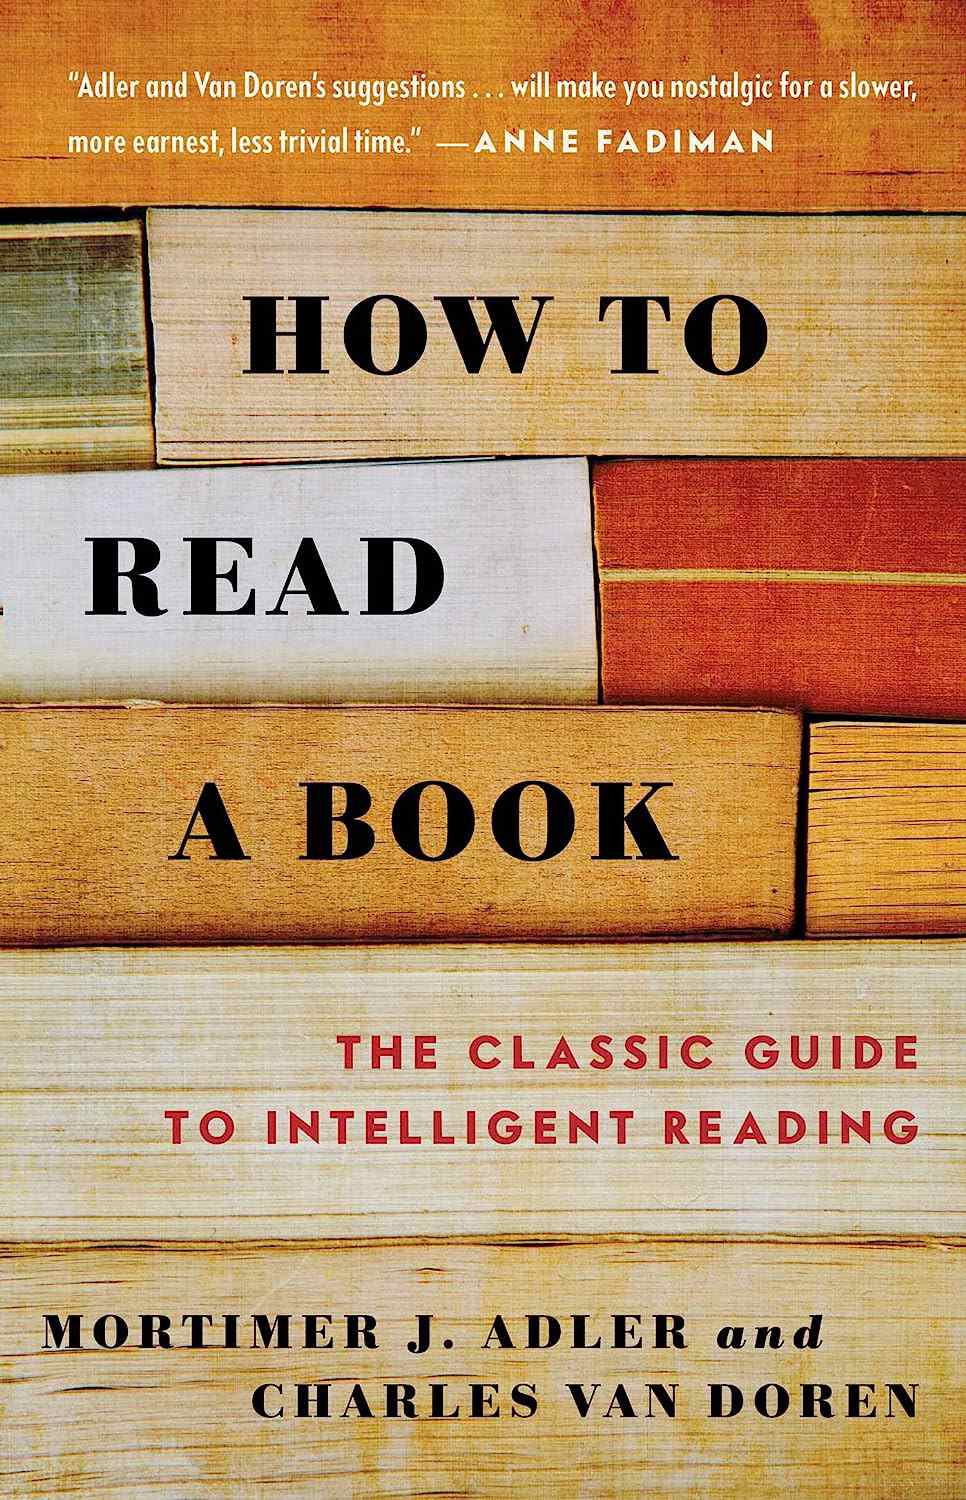 How to read a book by mortimer j. adler and charles van doren